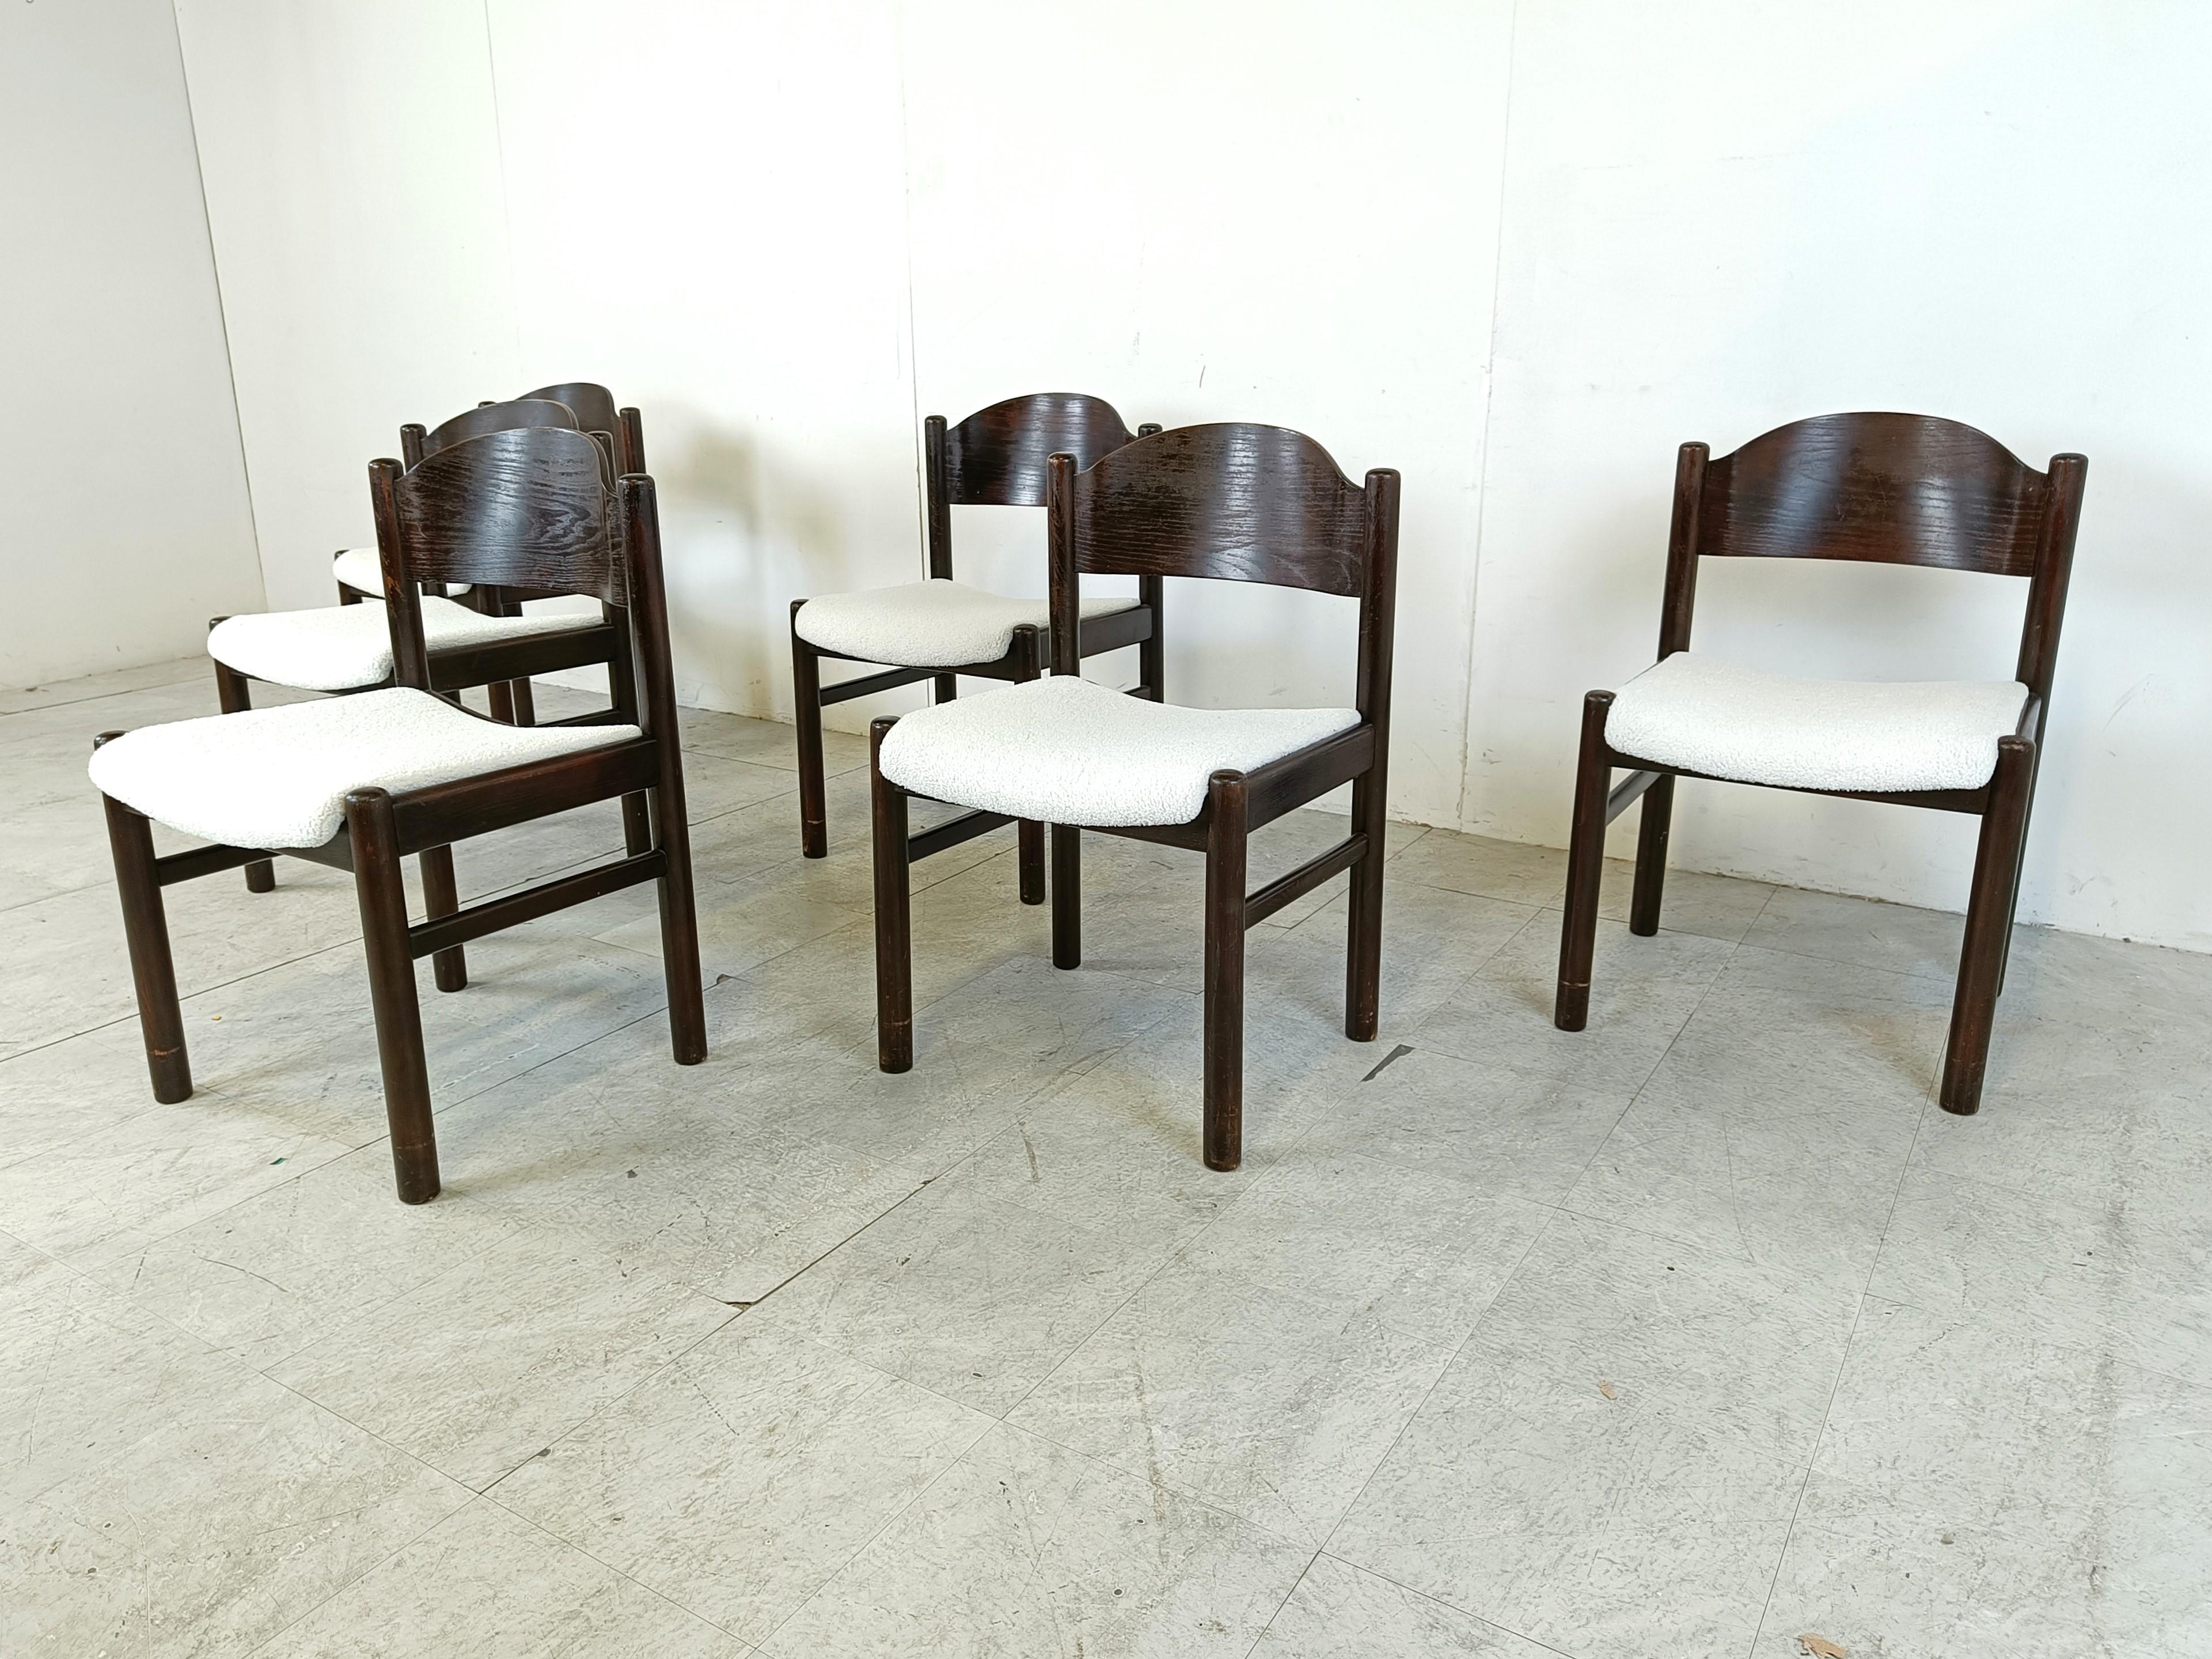 Vintage brutalist dining chairs, set of 6 - 1960s 1